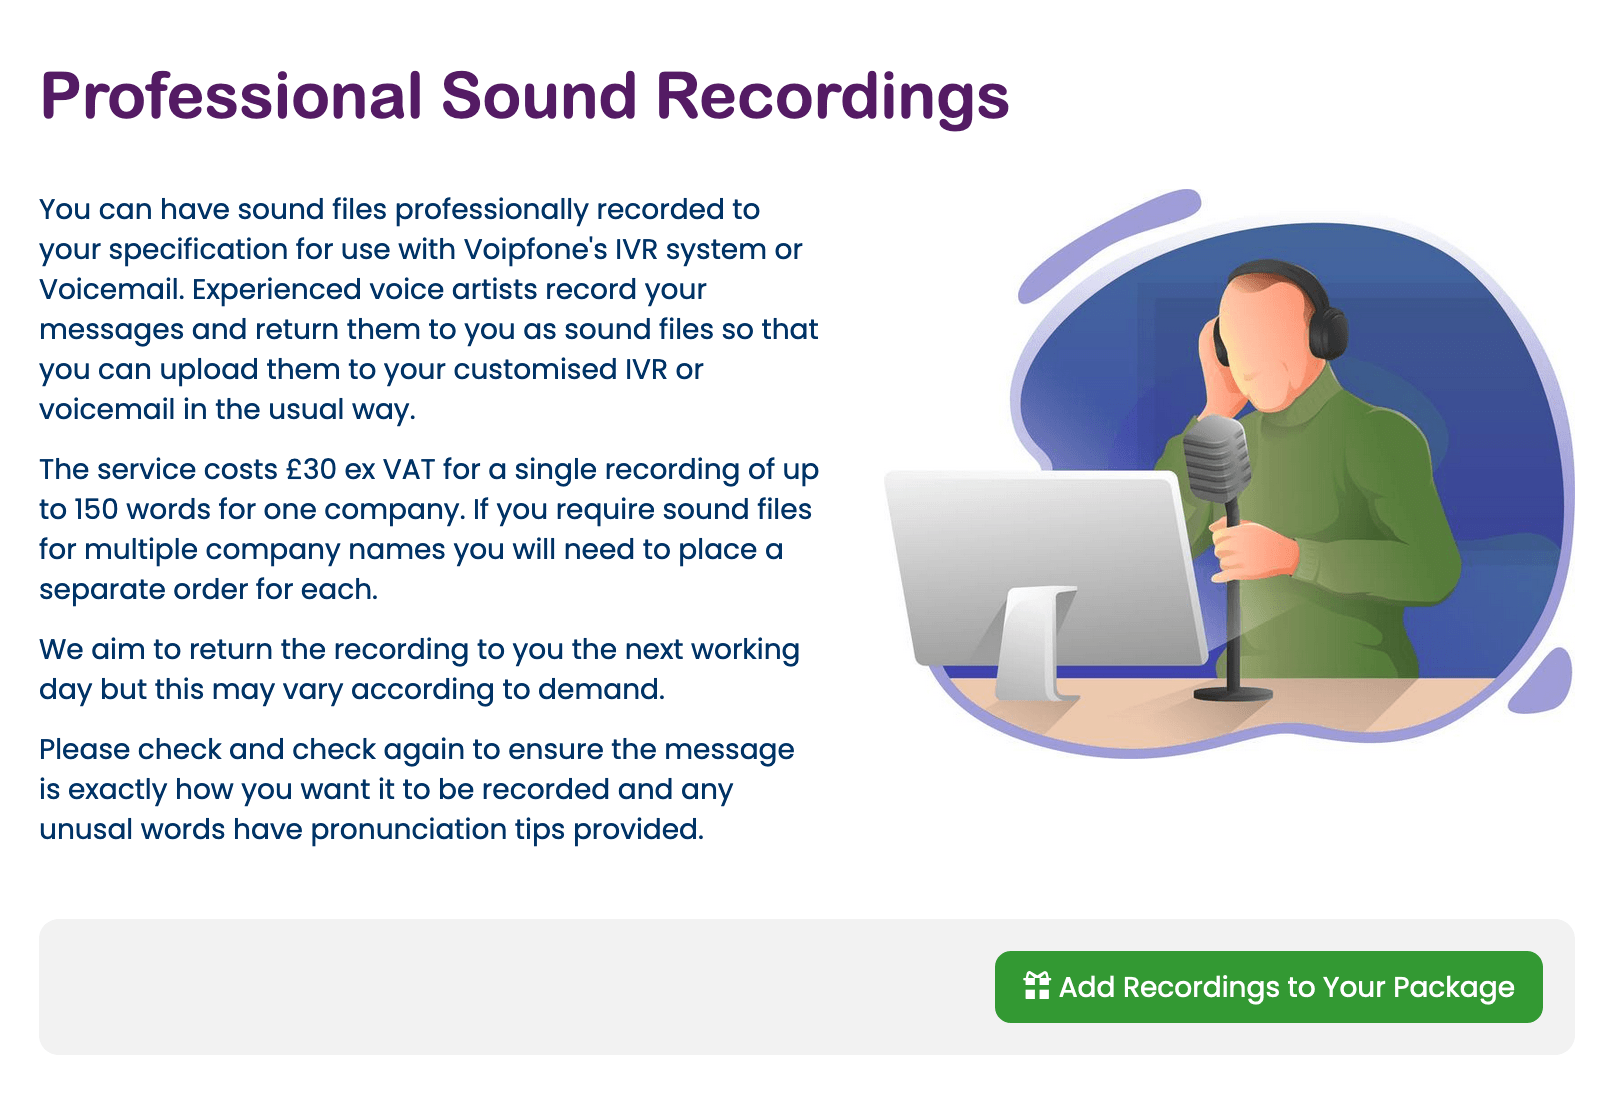 Adding professional sound recordings to your Voipfone package